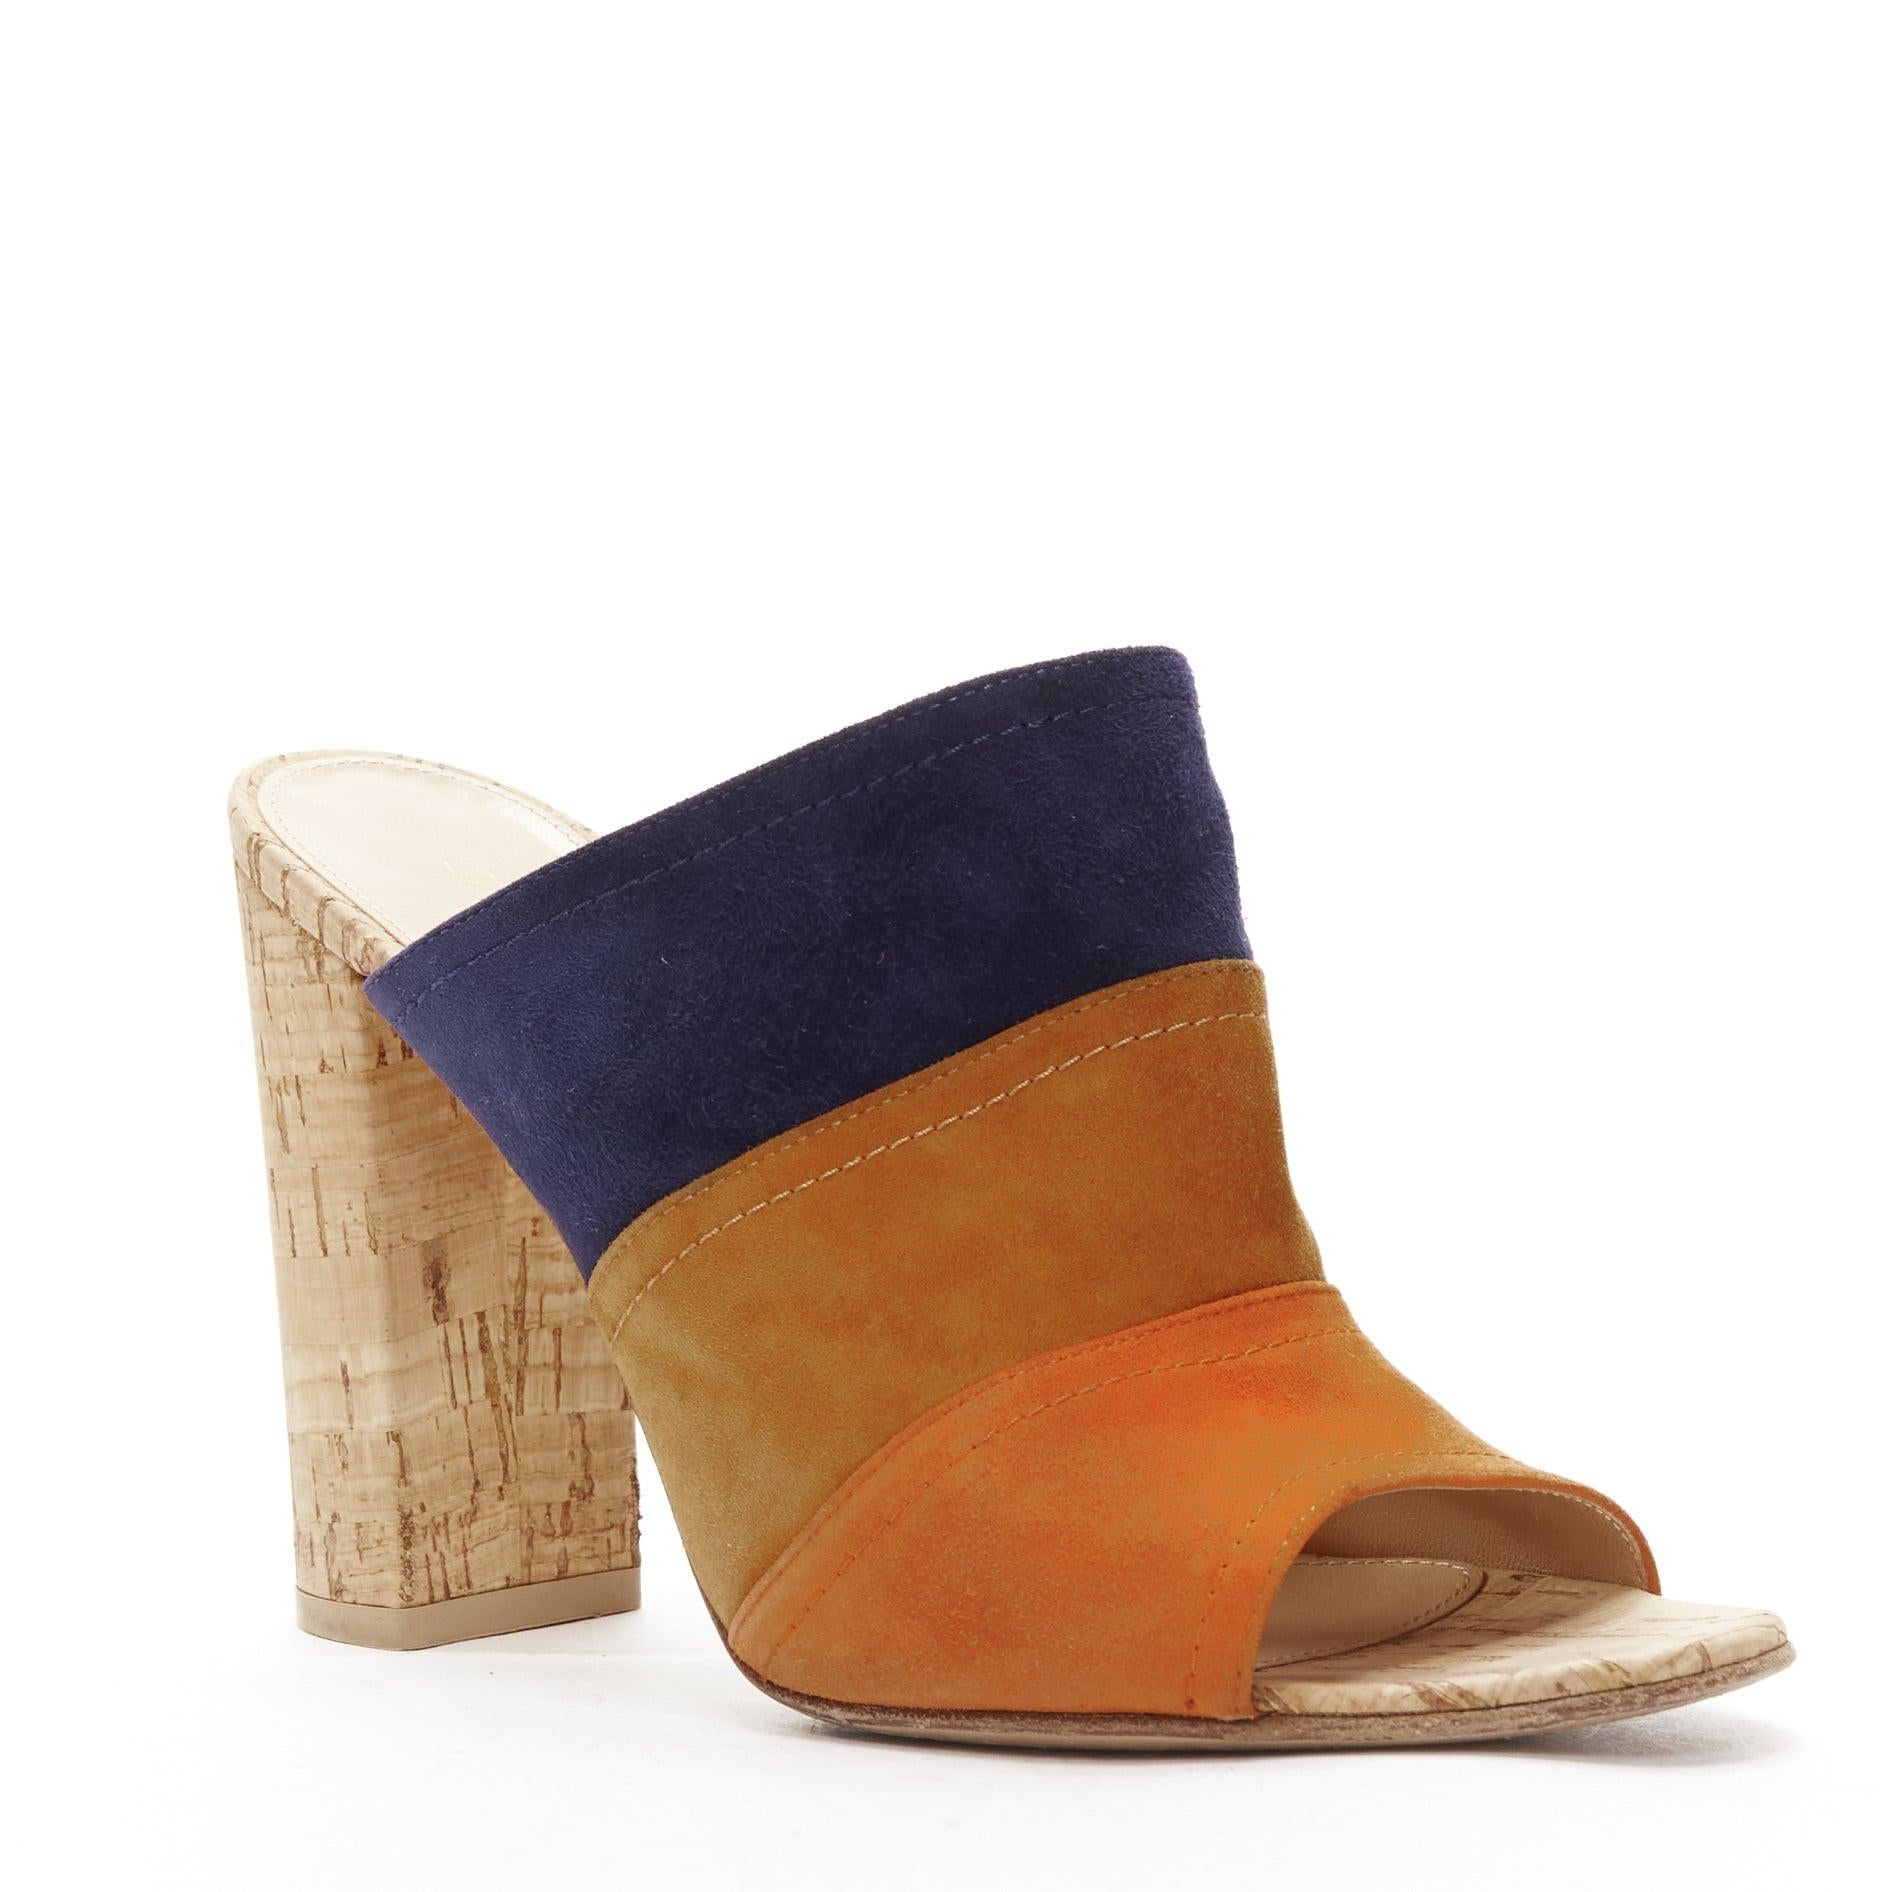 GIANVITO ROSSI orange brown navy suede leather color block cork mules EU37
Reference: MEKK/A00010
Brand: Gianvito Rossi
Material: Suede, Cork
Color: Brown, Orange
Pattern: Solid
Closure: Slip On
Lining: Nude Leather
Made in: